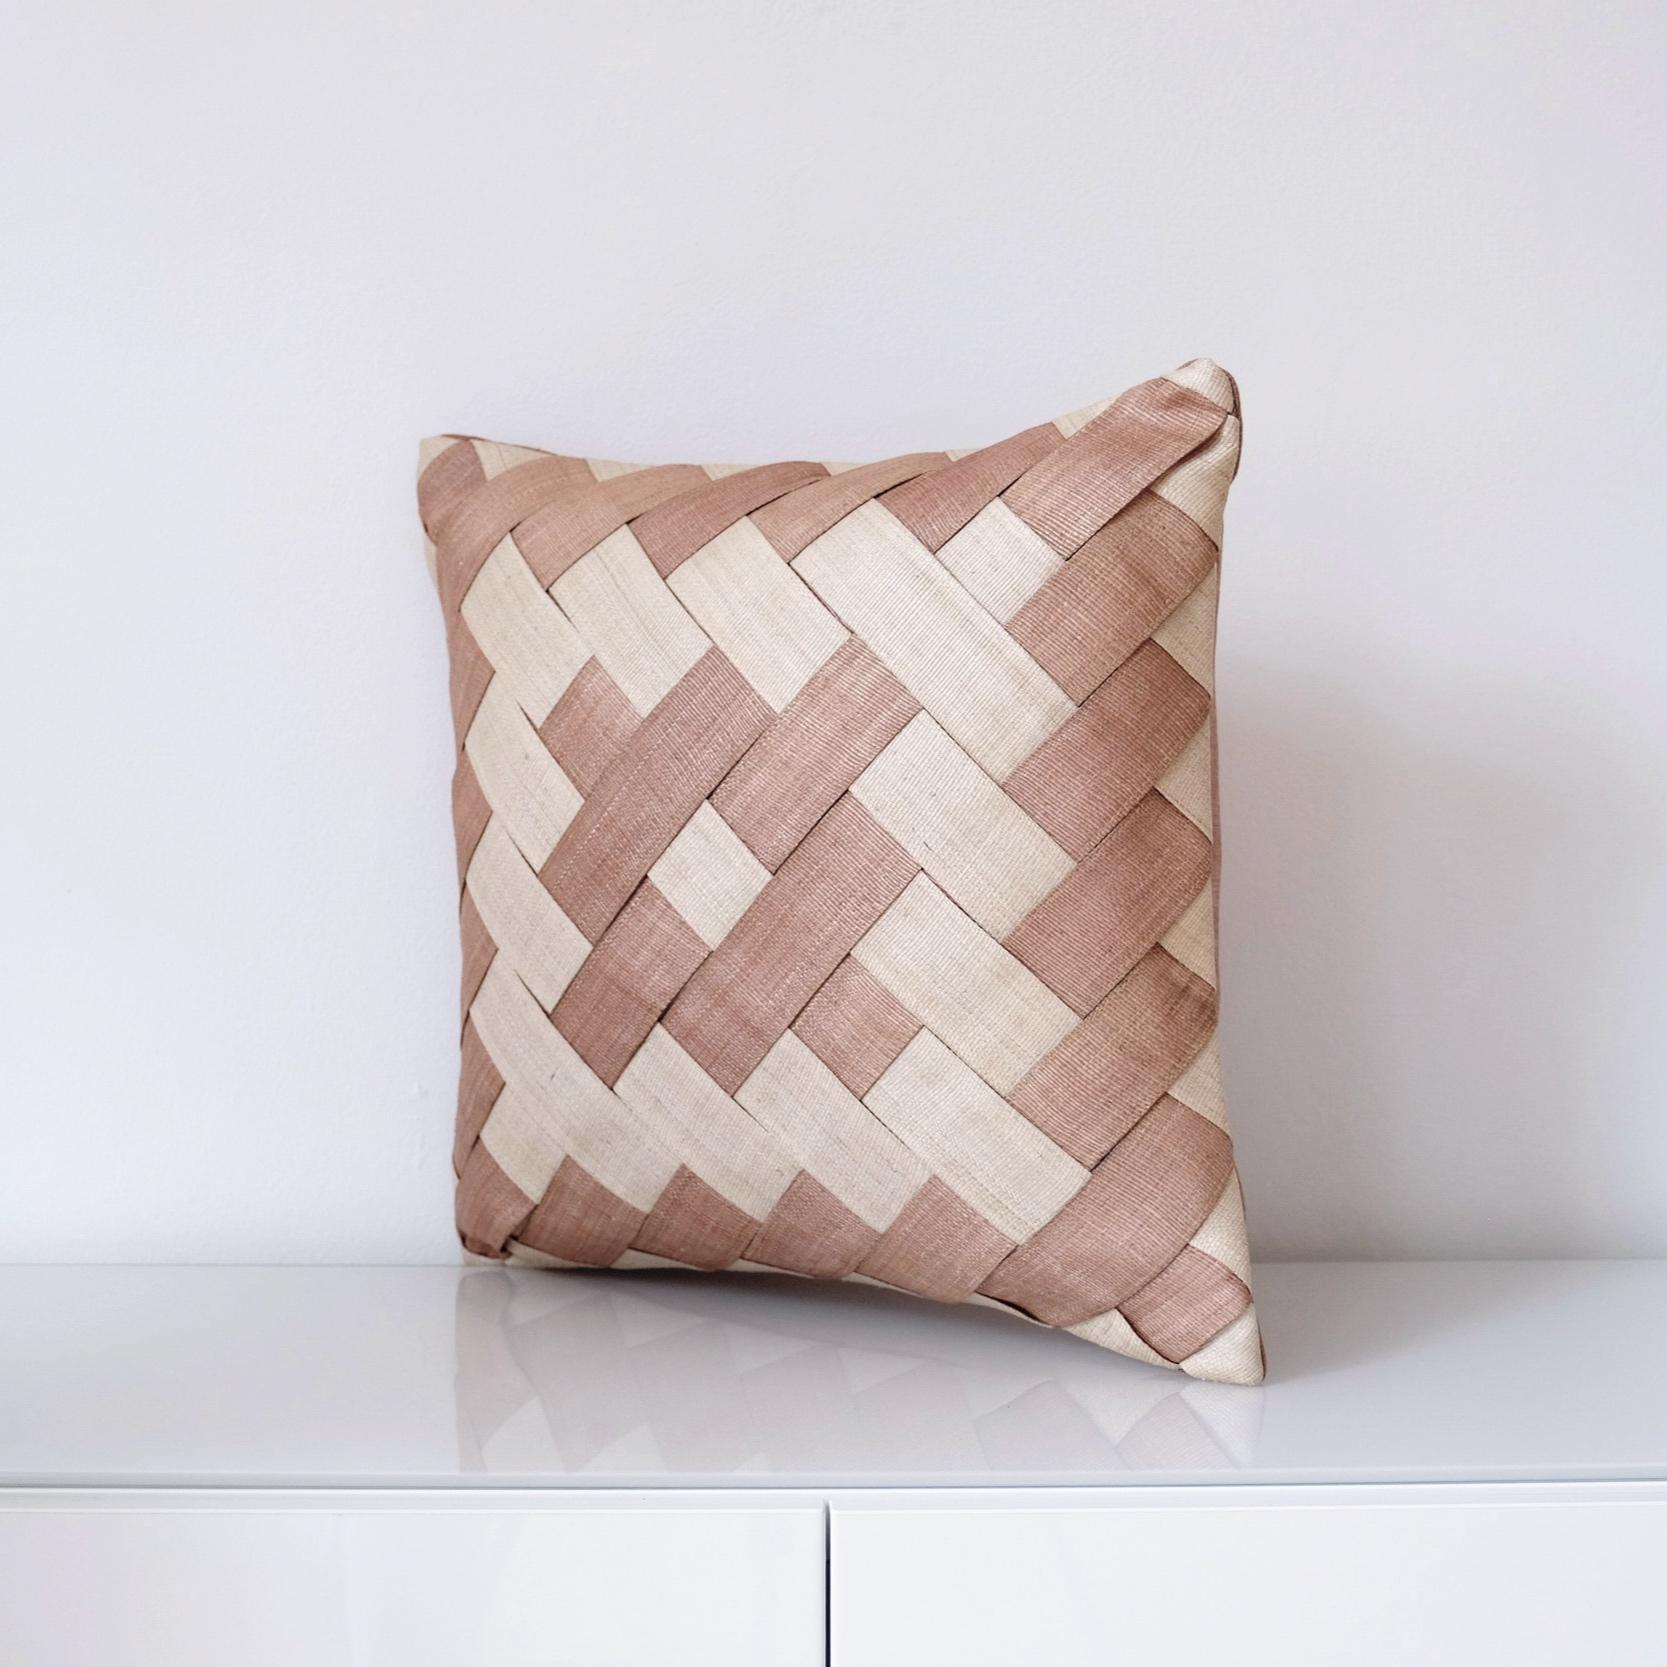 Handcrafted cushion cover made with naturally dyed and delicately woven T’nalak cloth from Abaca fibres and fastened with coconut shell buttons
Colour: light sand and terracotta

Measures 50 x 50 cm
19.7? x 19.7?
Recommended cushion filler: 61